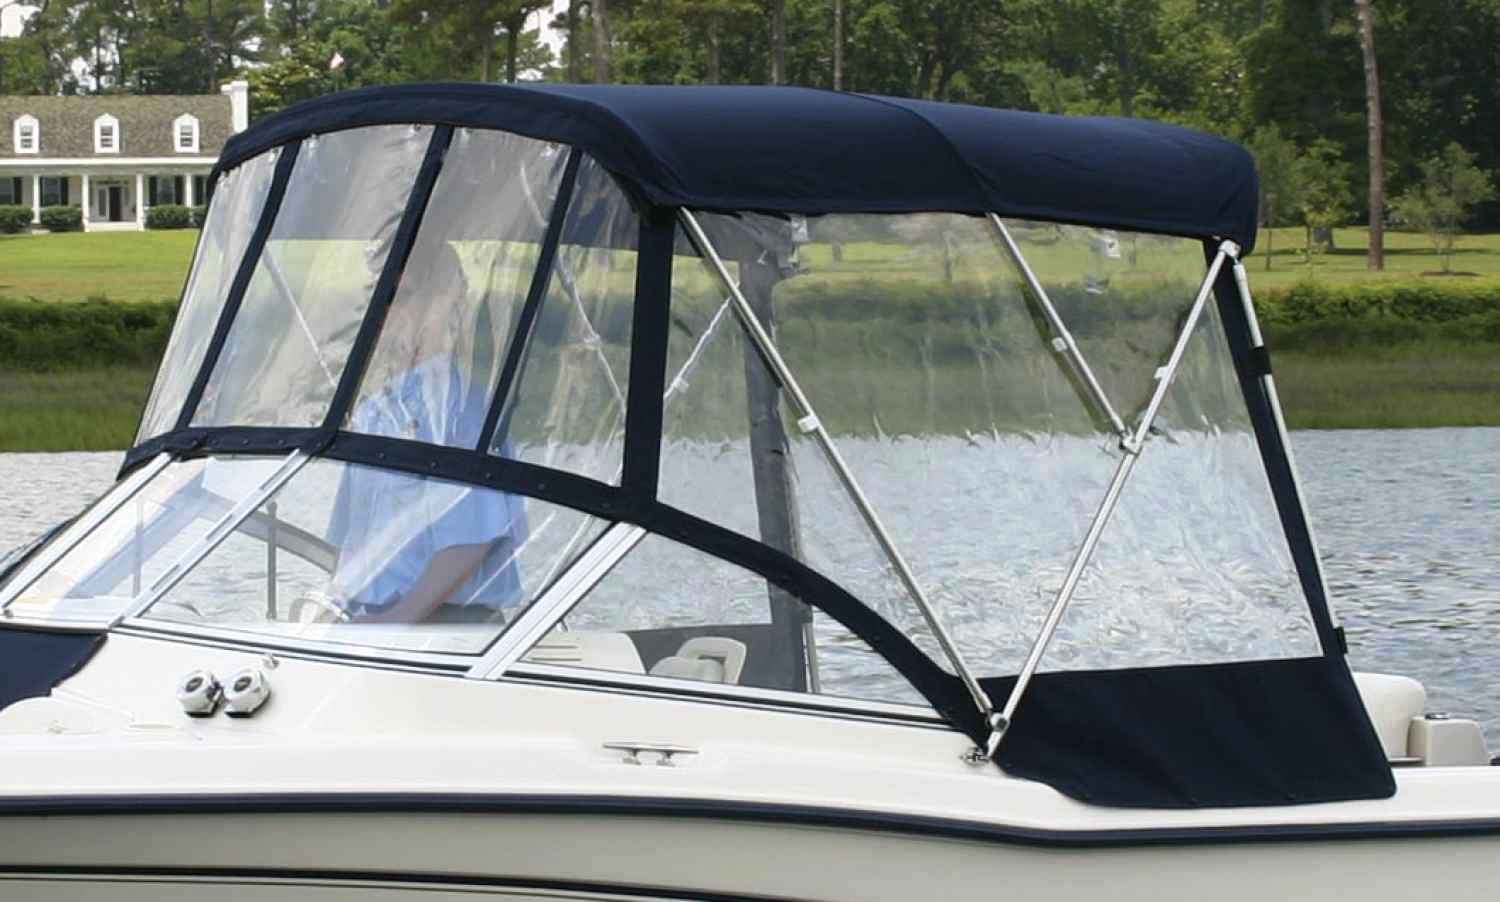 Bimini Side-Curtains (Factory OEM) for White® Freedom 225 (2011-2015) from http://AmericanBoatCanvas.online™ (p/n: Bimini-Side-Curtains-OEM-G)